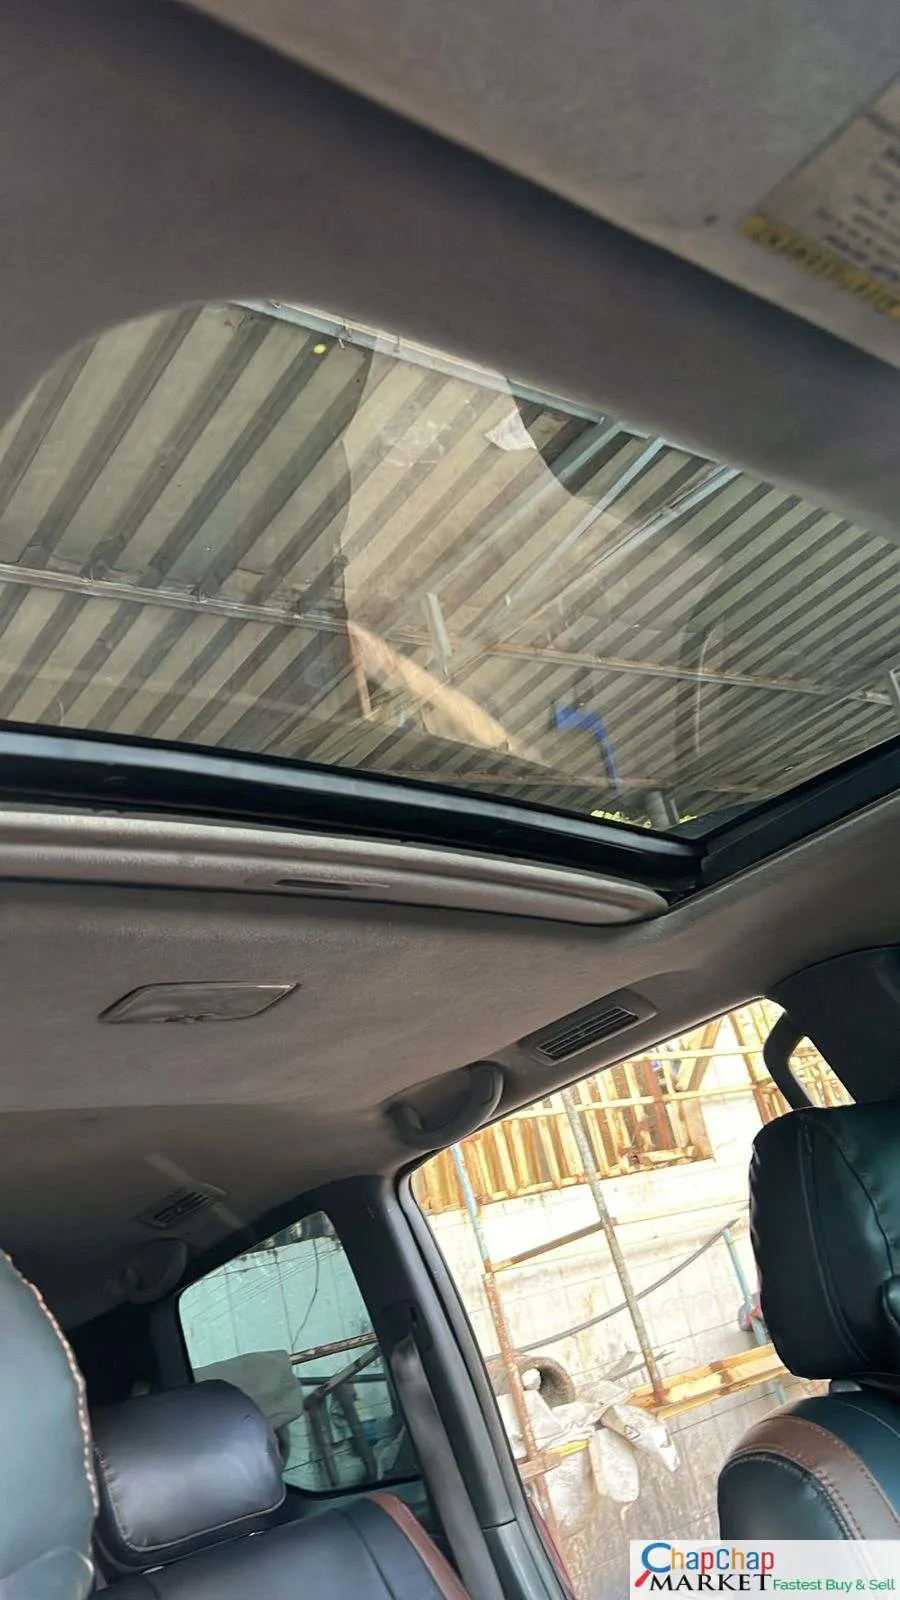 Toyota PRADO KDL Sunroof QUICK SALE YOU PAY 30% DEPOSIT TRADE IN OK EXCLUSIVE! (SOLD)